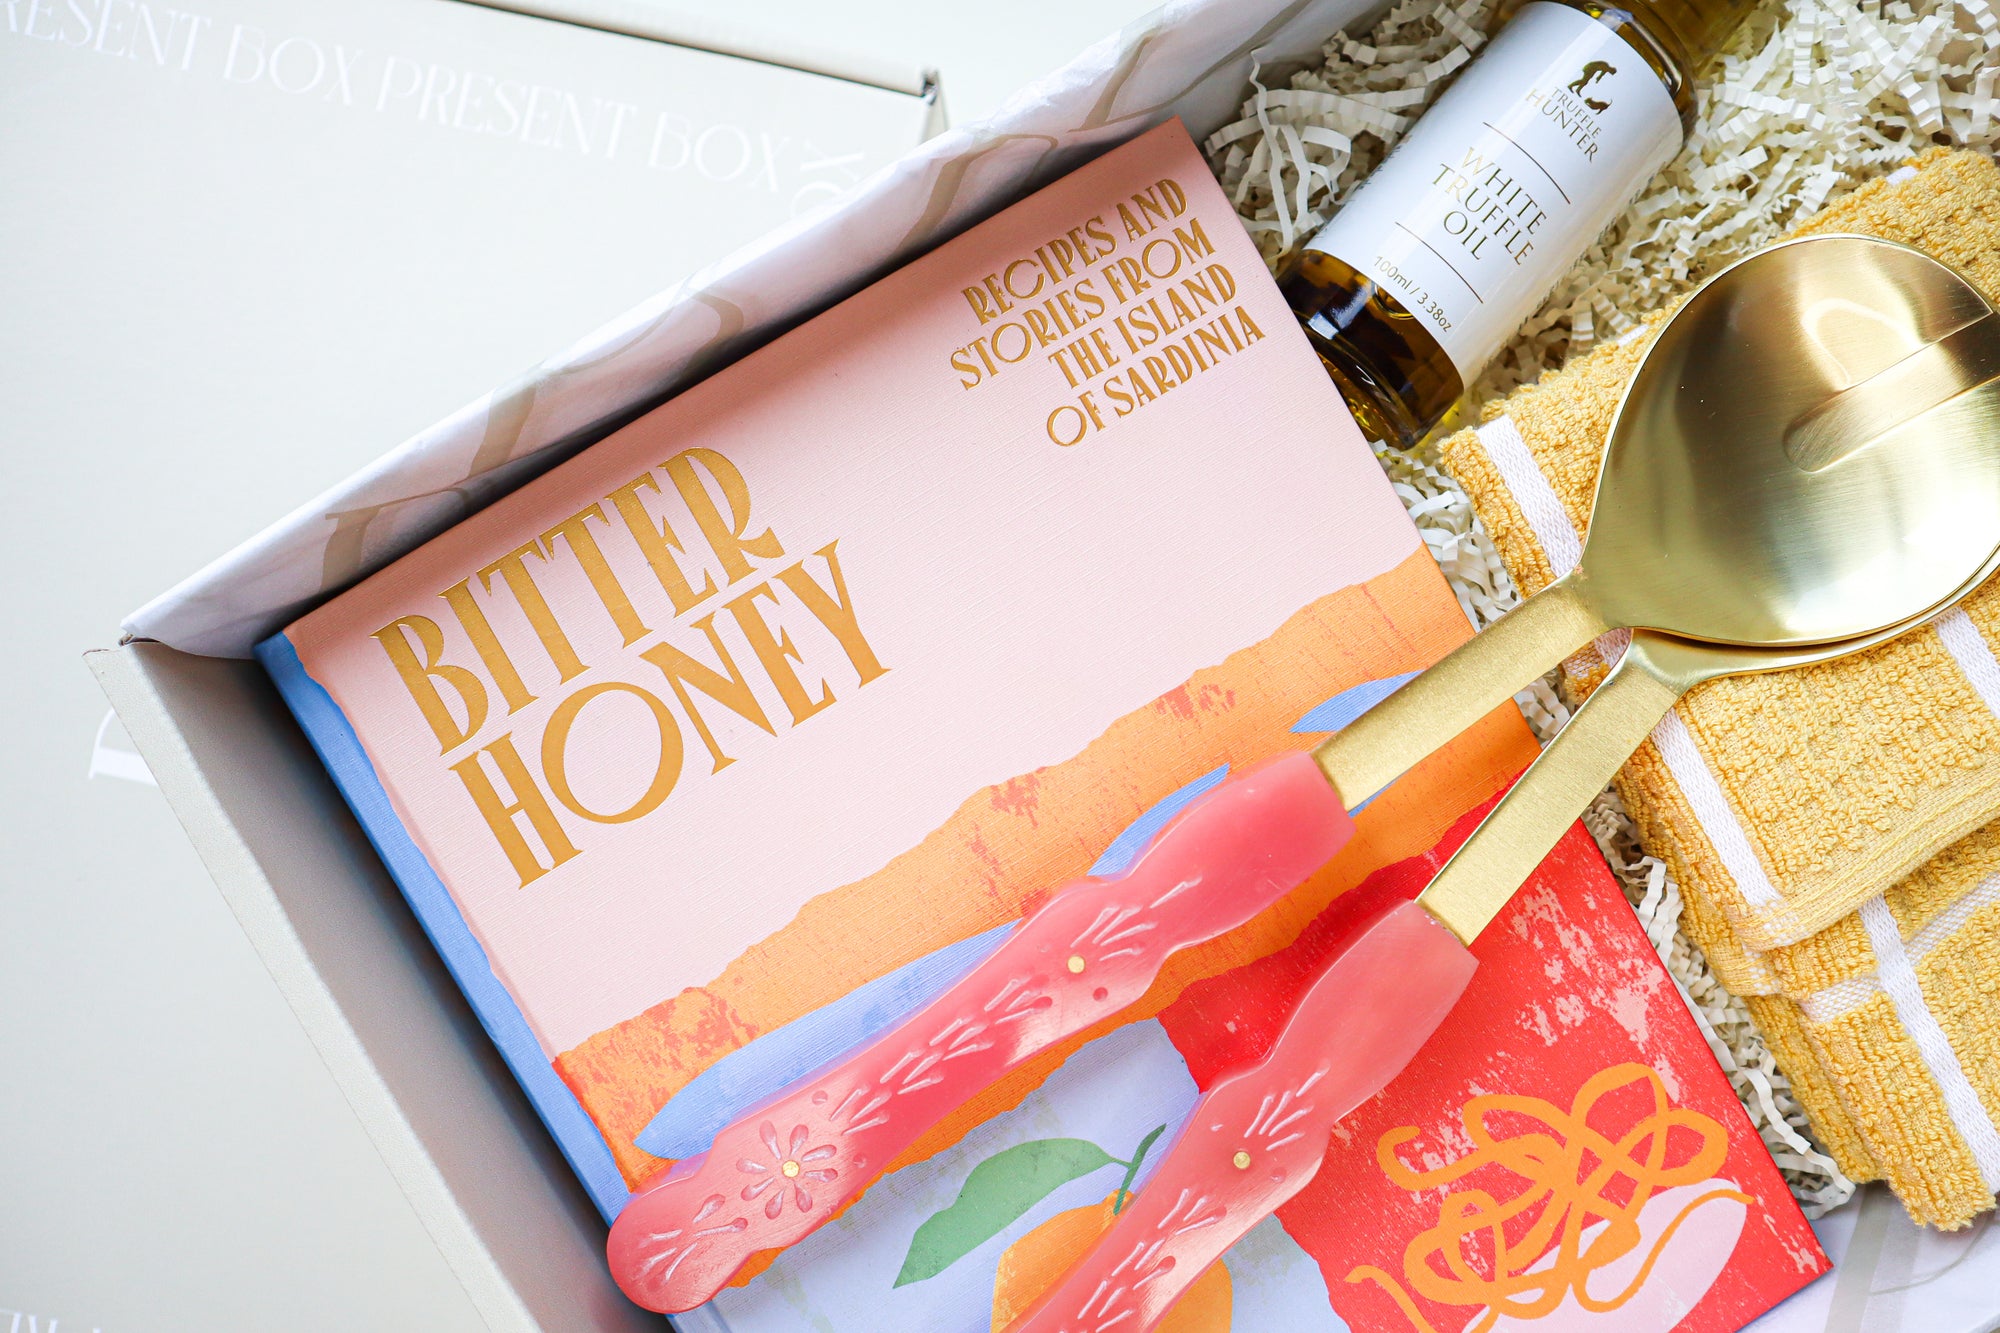 A beautiful, brightly coloured, hard cover cook book titled Bitter Honey with 2 pink and gold salad servers and a small bottle of White Truffle Oil in a gift box